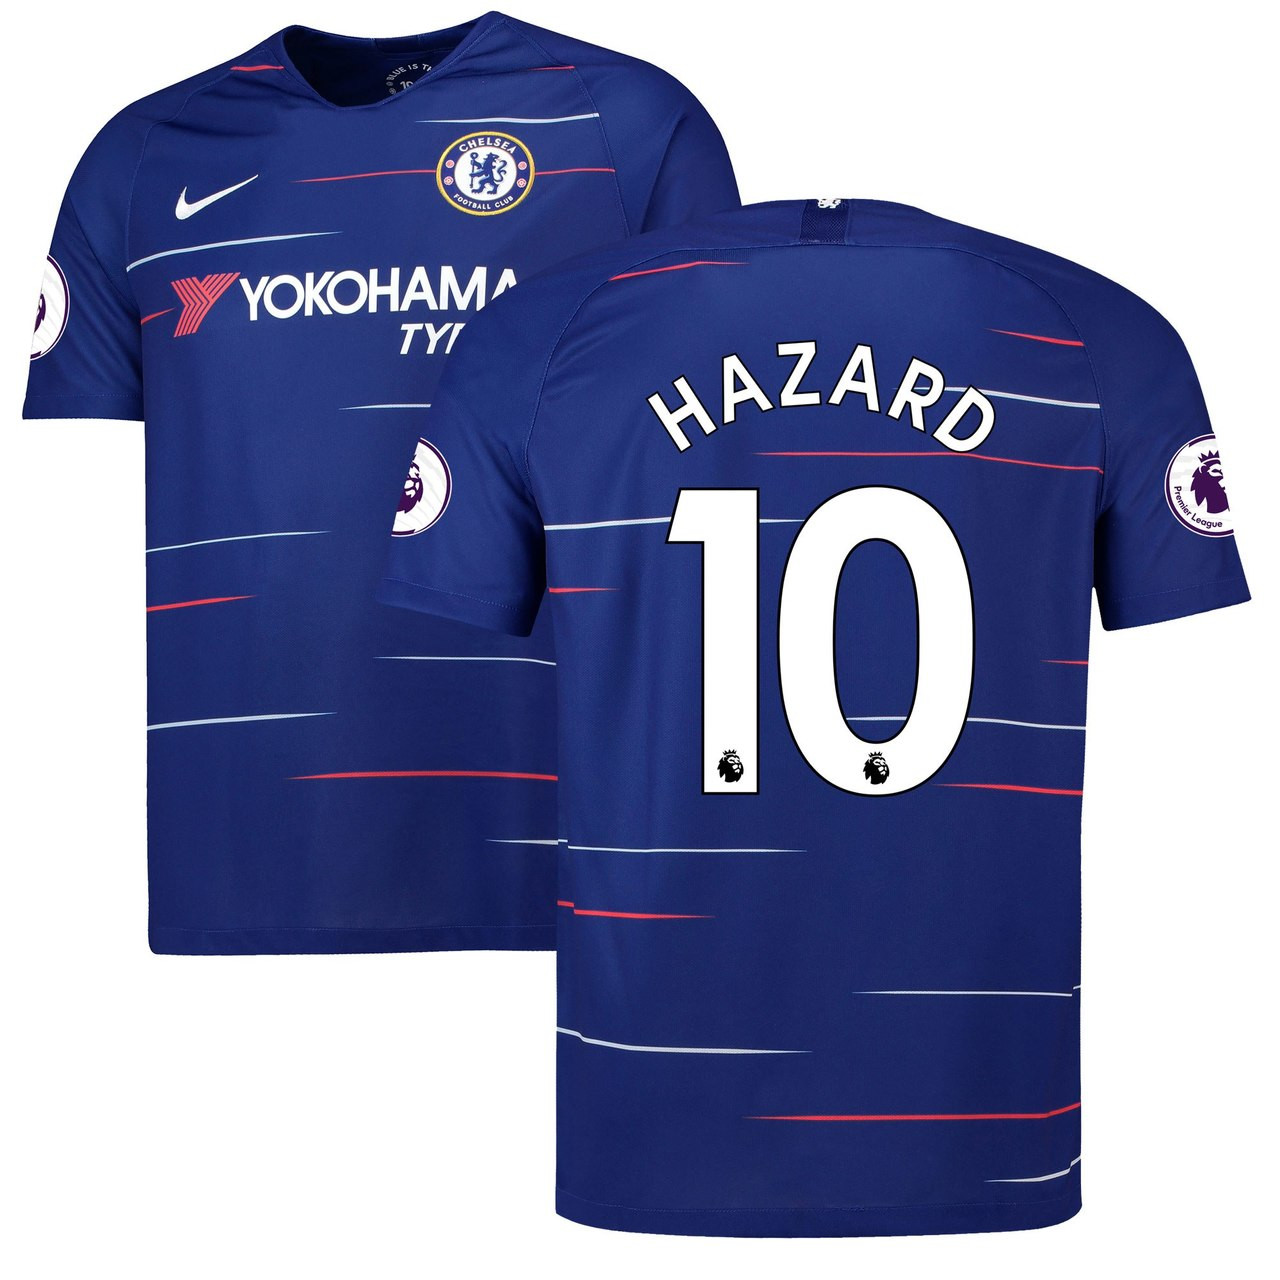 chelsea red jersey